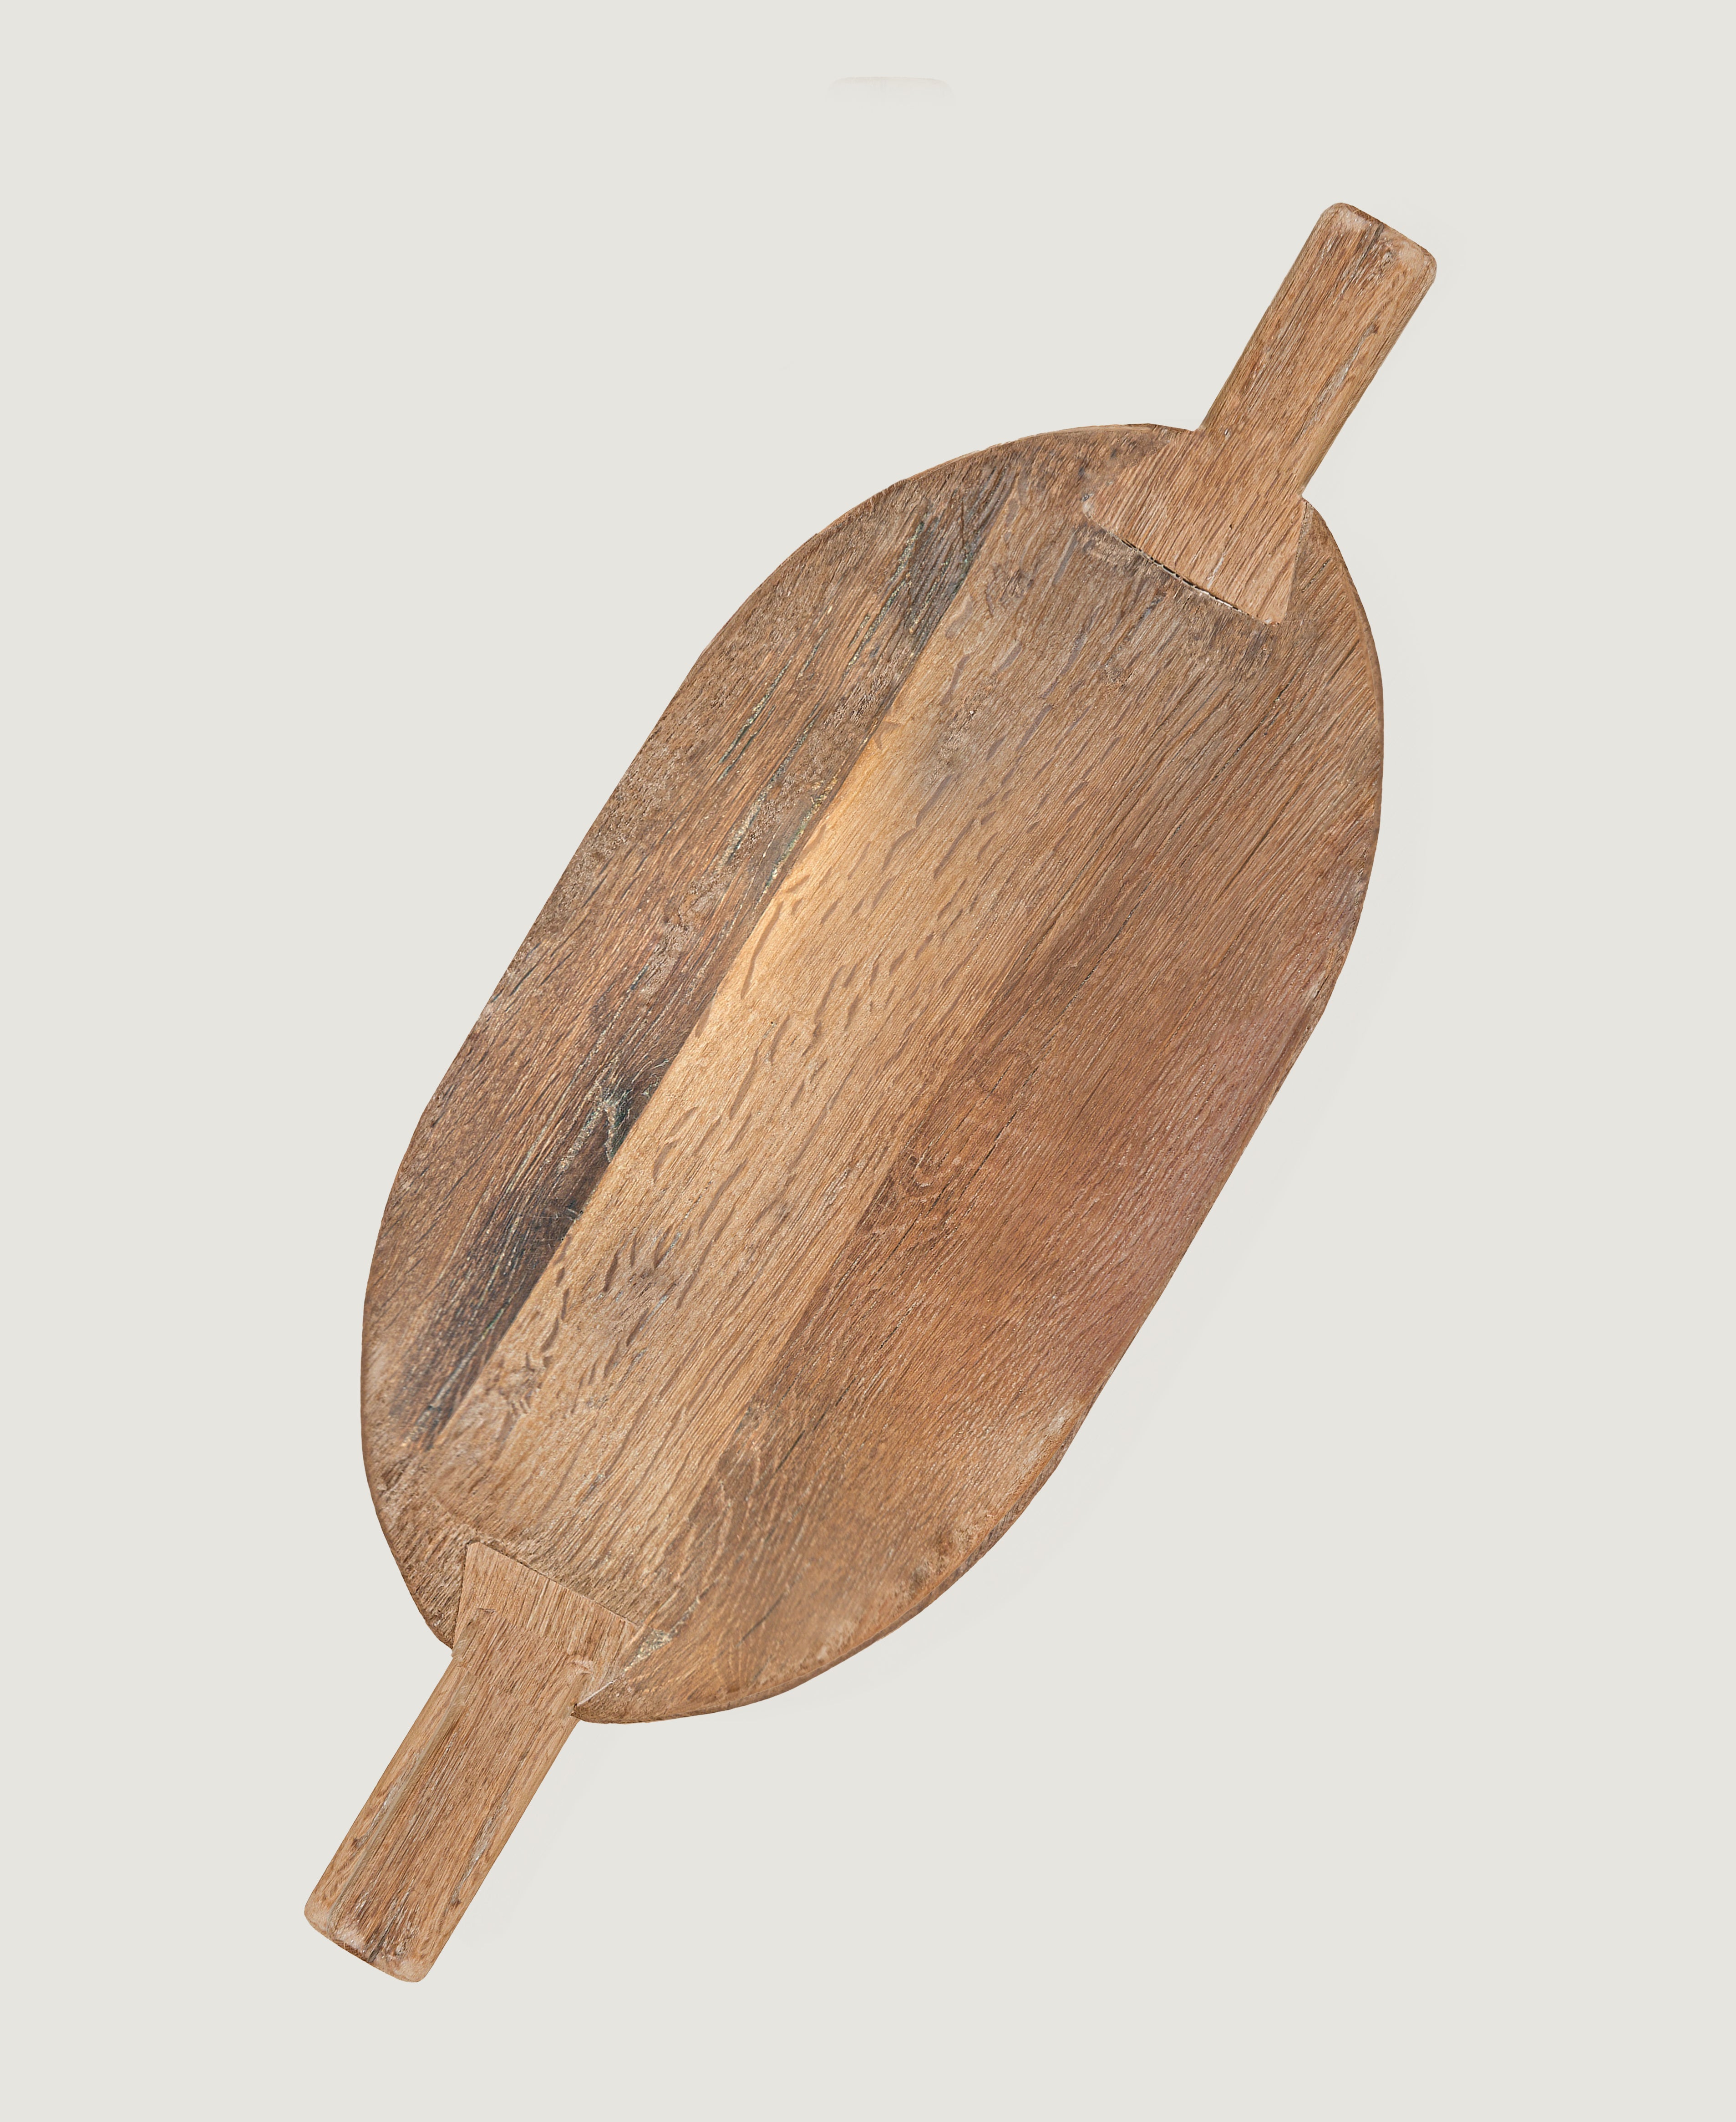   Double Handled Cutting Board, Oval  